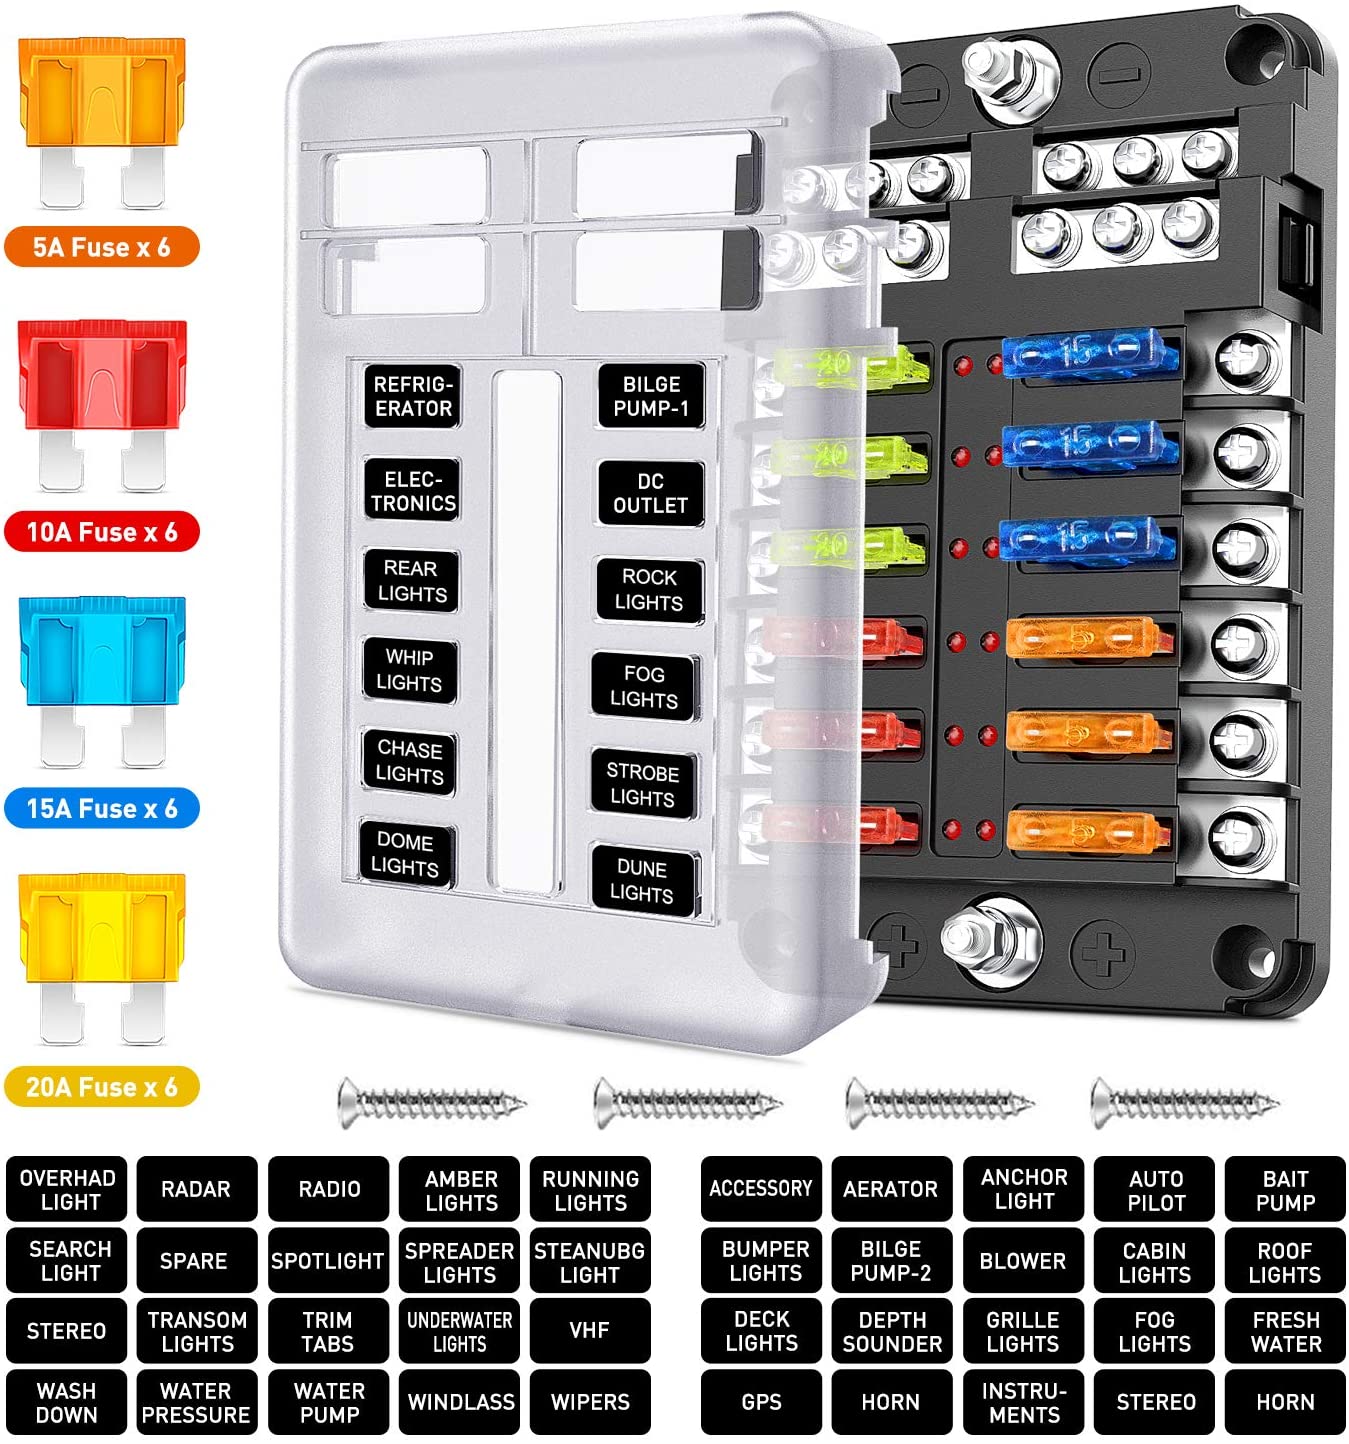 Nilight 12 Way Blade Fuse Block 12 Circuits with Negative Bus Fuse Box Holder with LED Indicator ATO/ATC Fuse Panel Waterproof Cover for 12V Automotive Cars Marine Boats,RVs,Trailers,2 Years Warranty